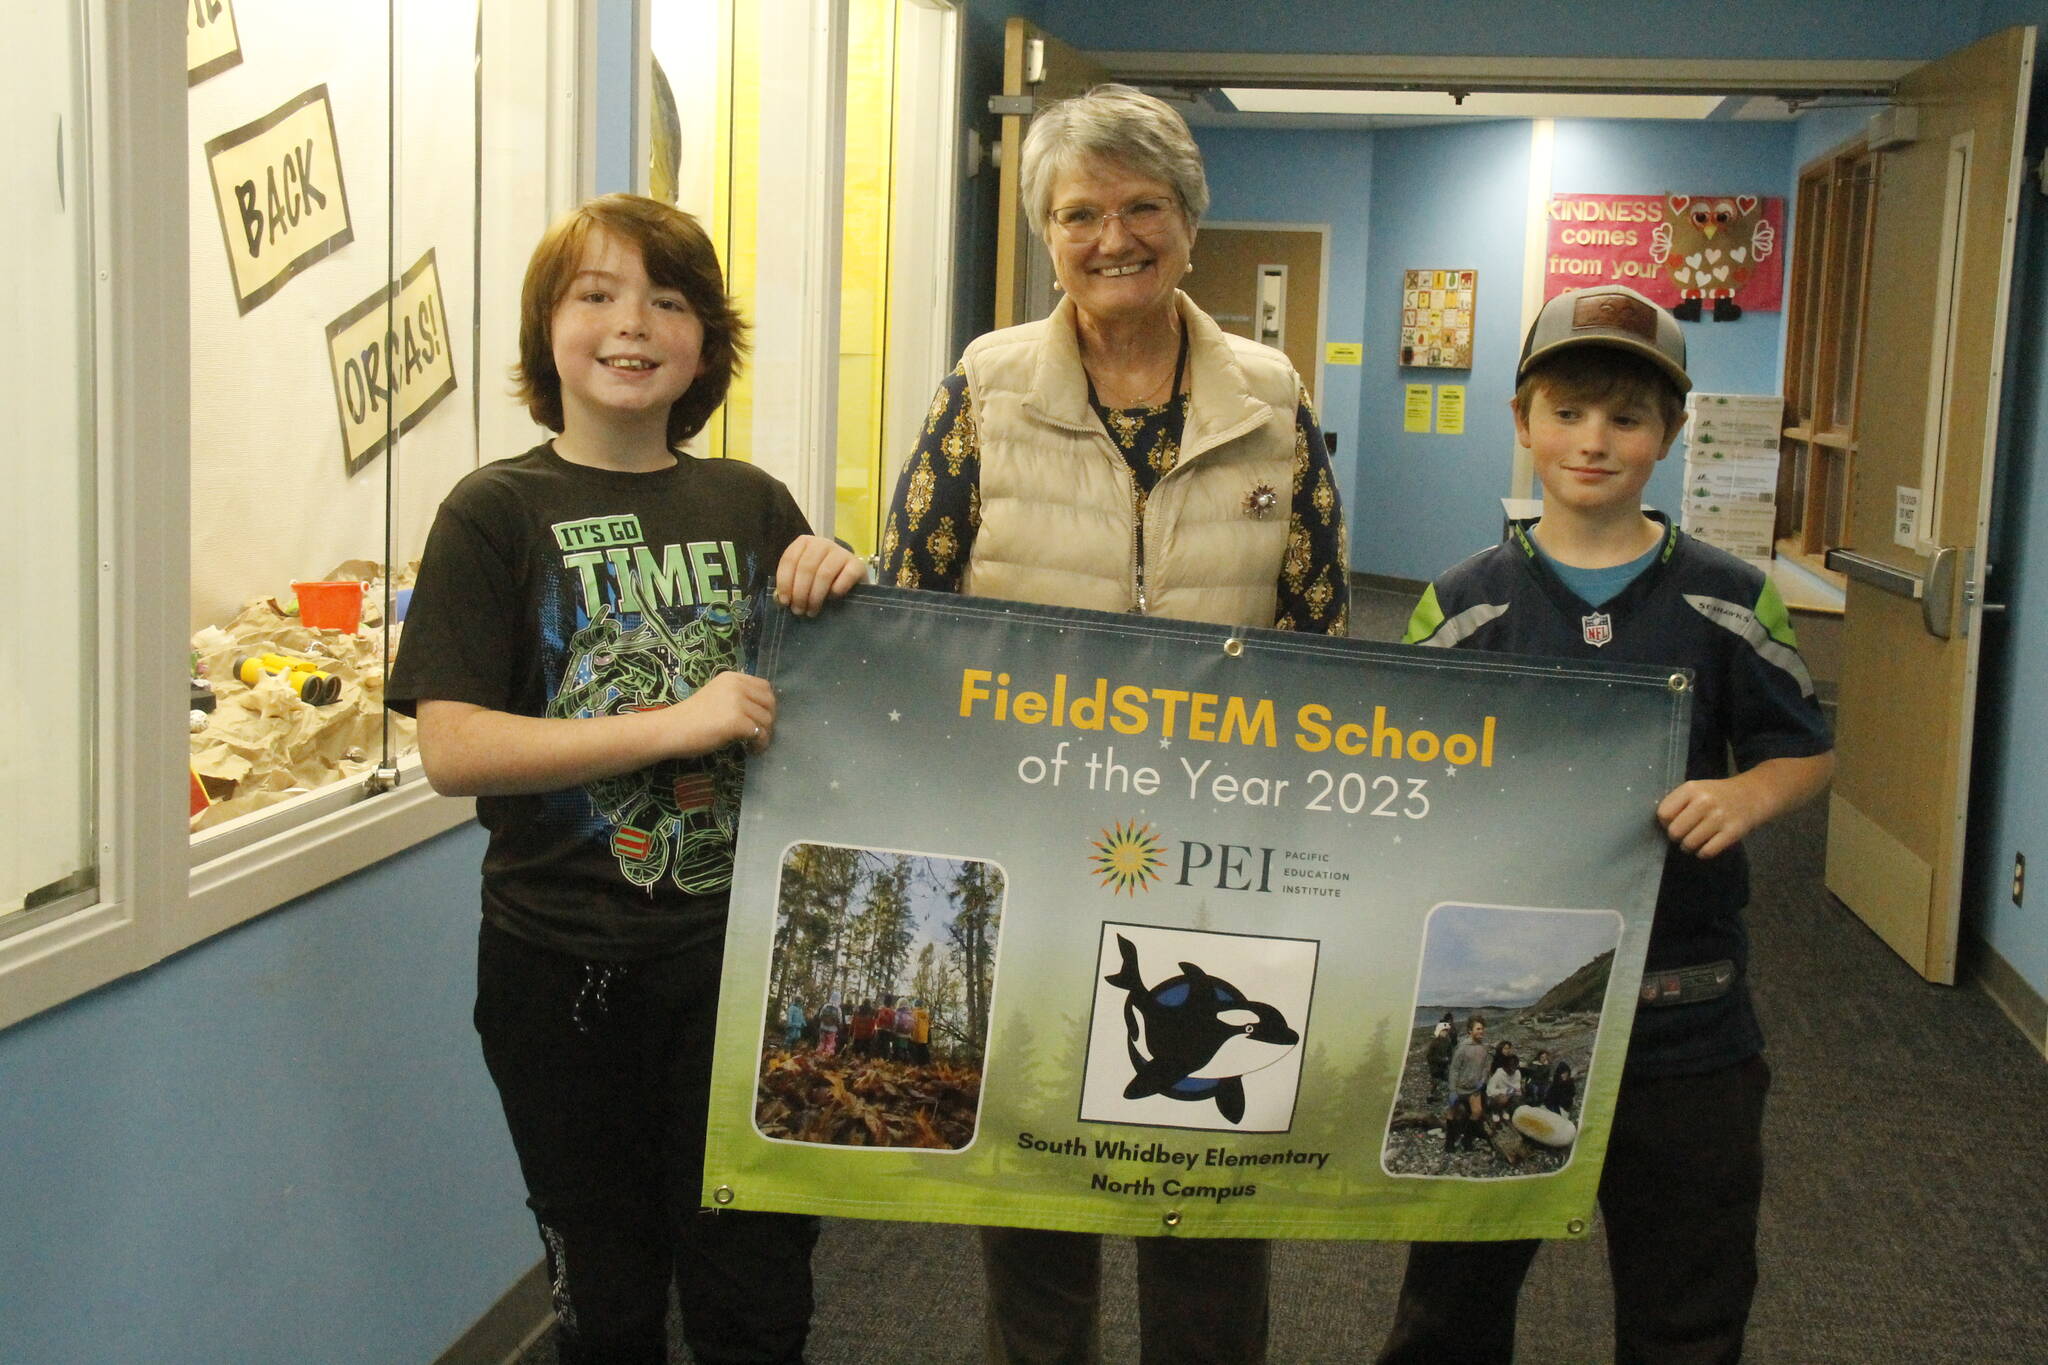 From left, David Bryant, 11, South Whidbey Elementary School Principal Susie Richards and Carter Poolman, 10, hold up a banner celebrating the FieldStem School of the Year award. (Photo by Kira Erickson/South Whidbey Record)